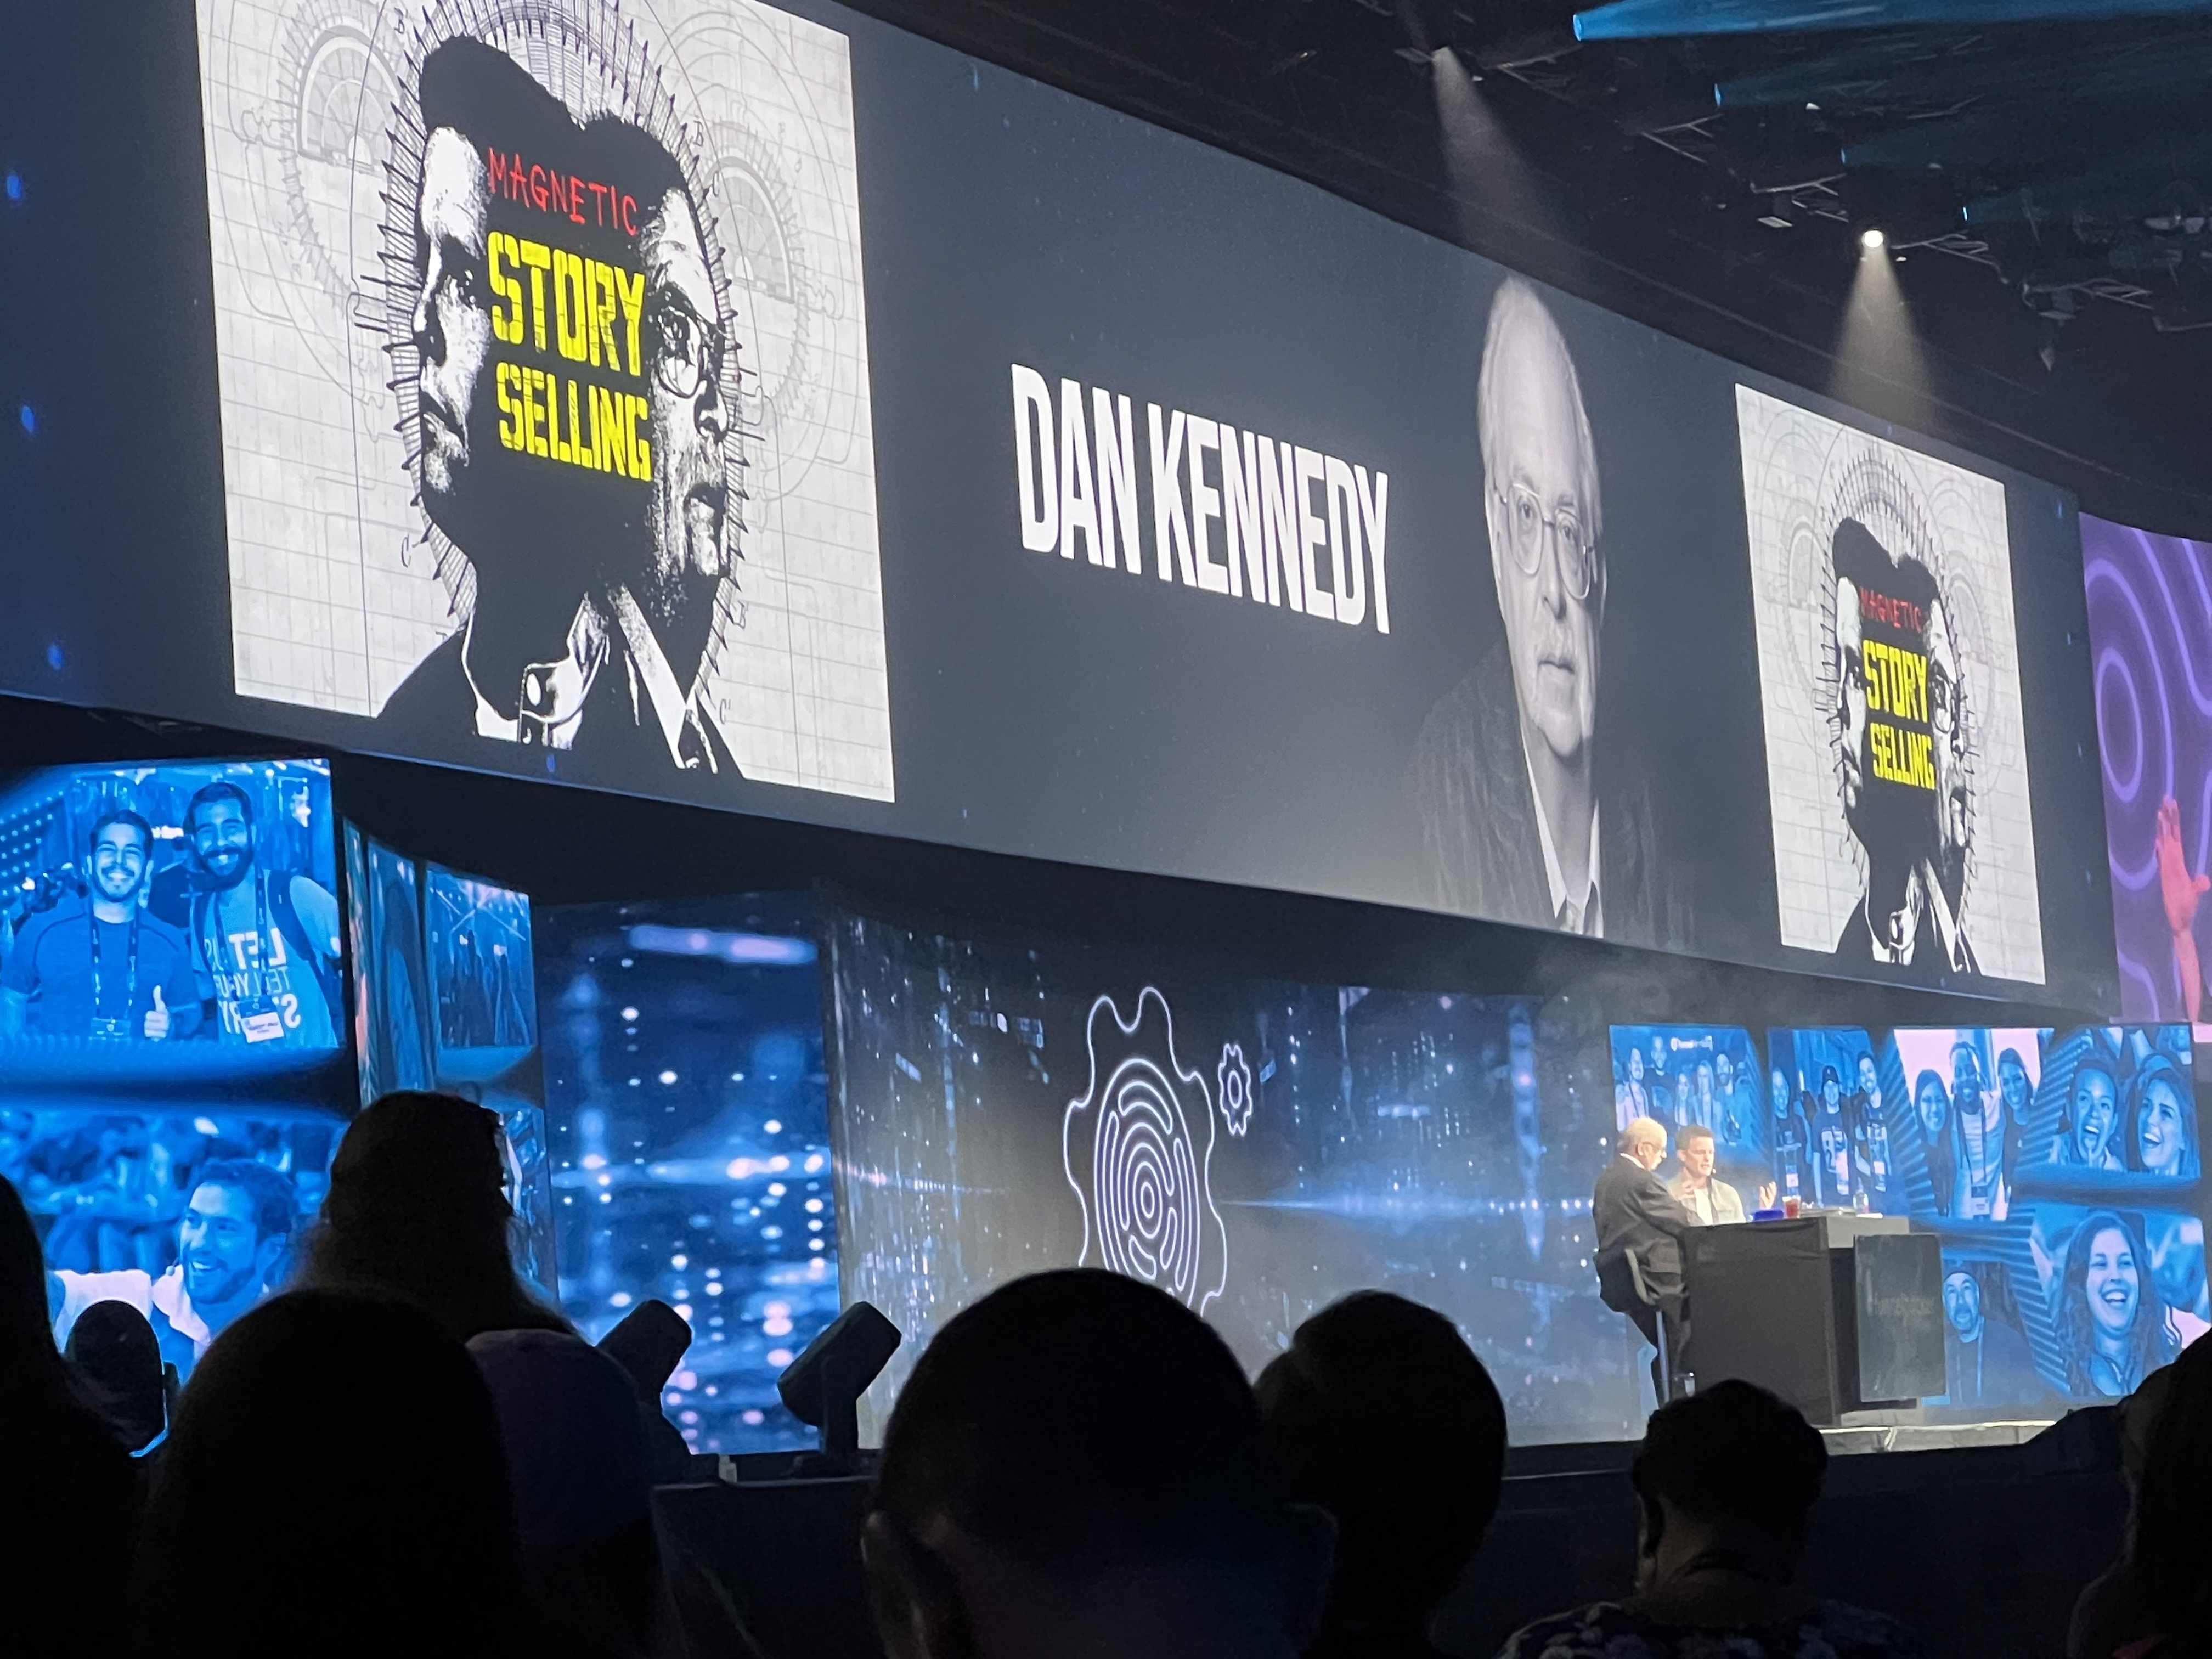 Russell Brunson interviewing Dan Kennedy on stage with a screen advertising him